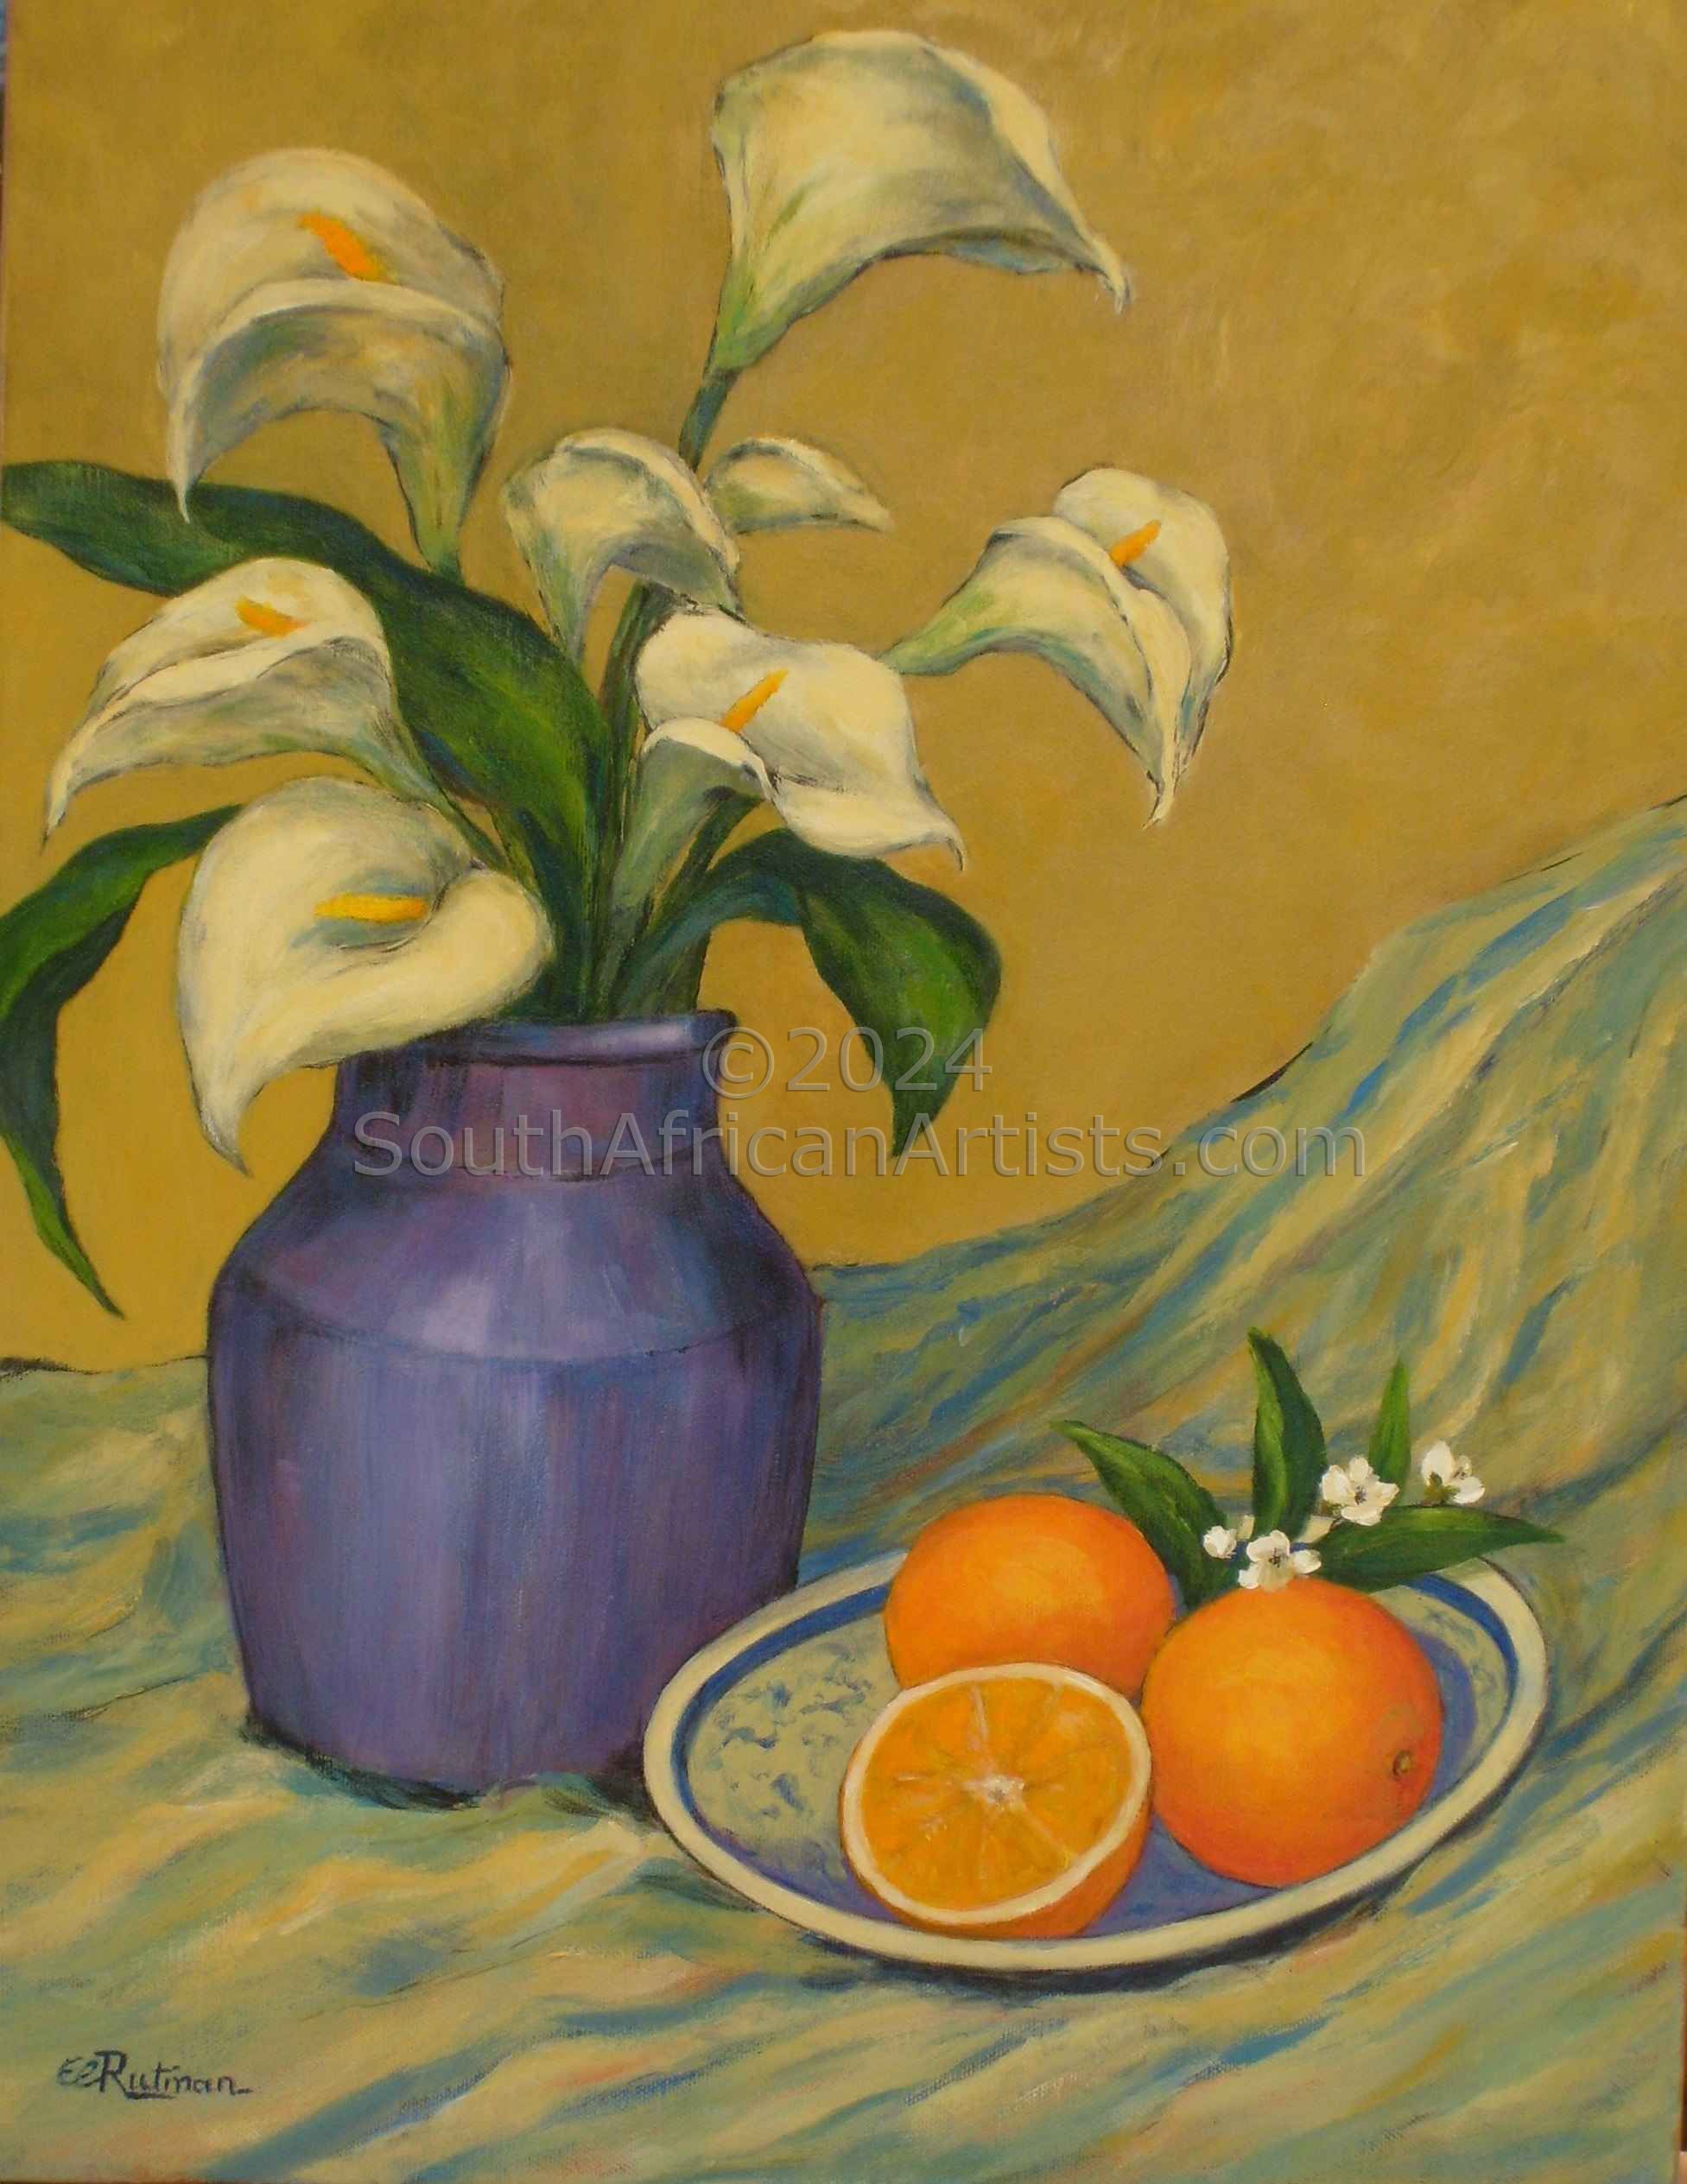 Arum Lilies and Oranges